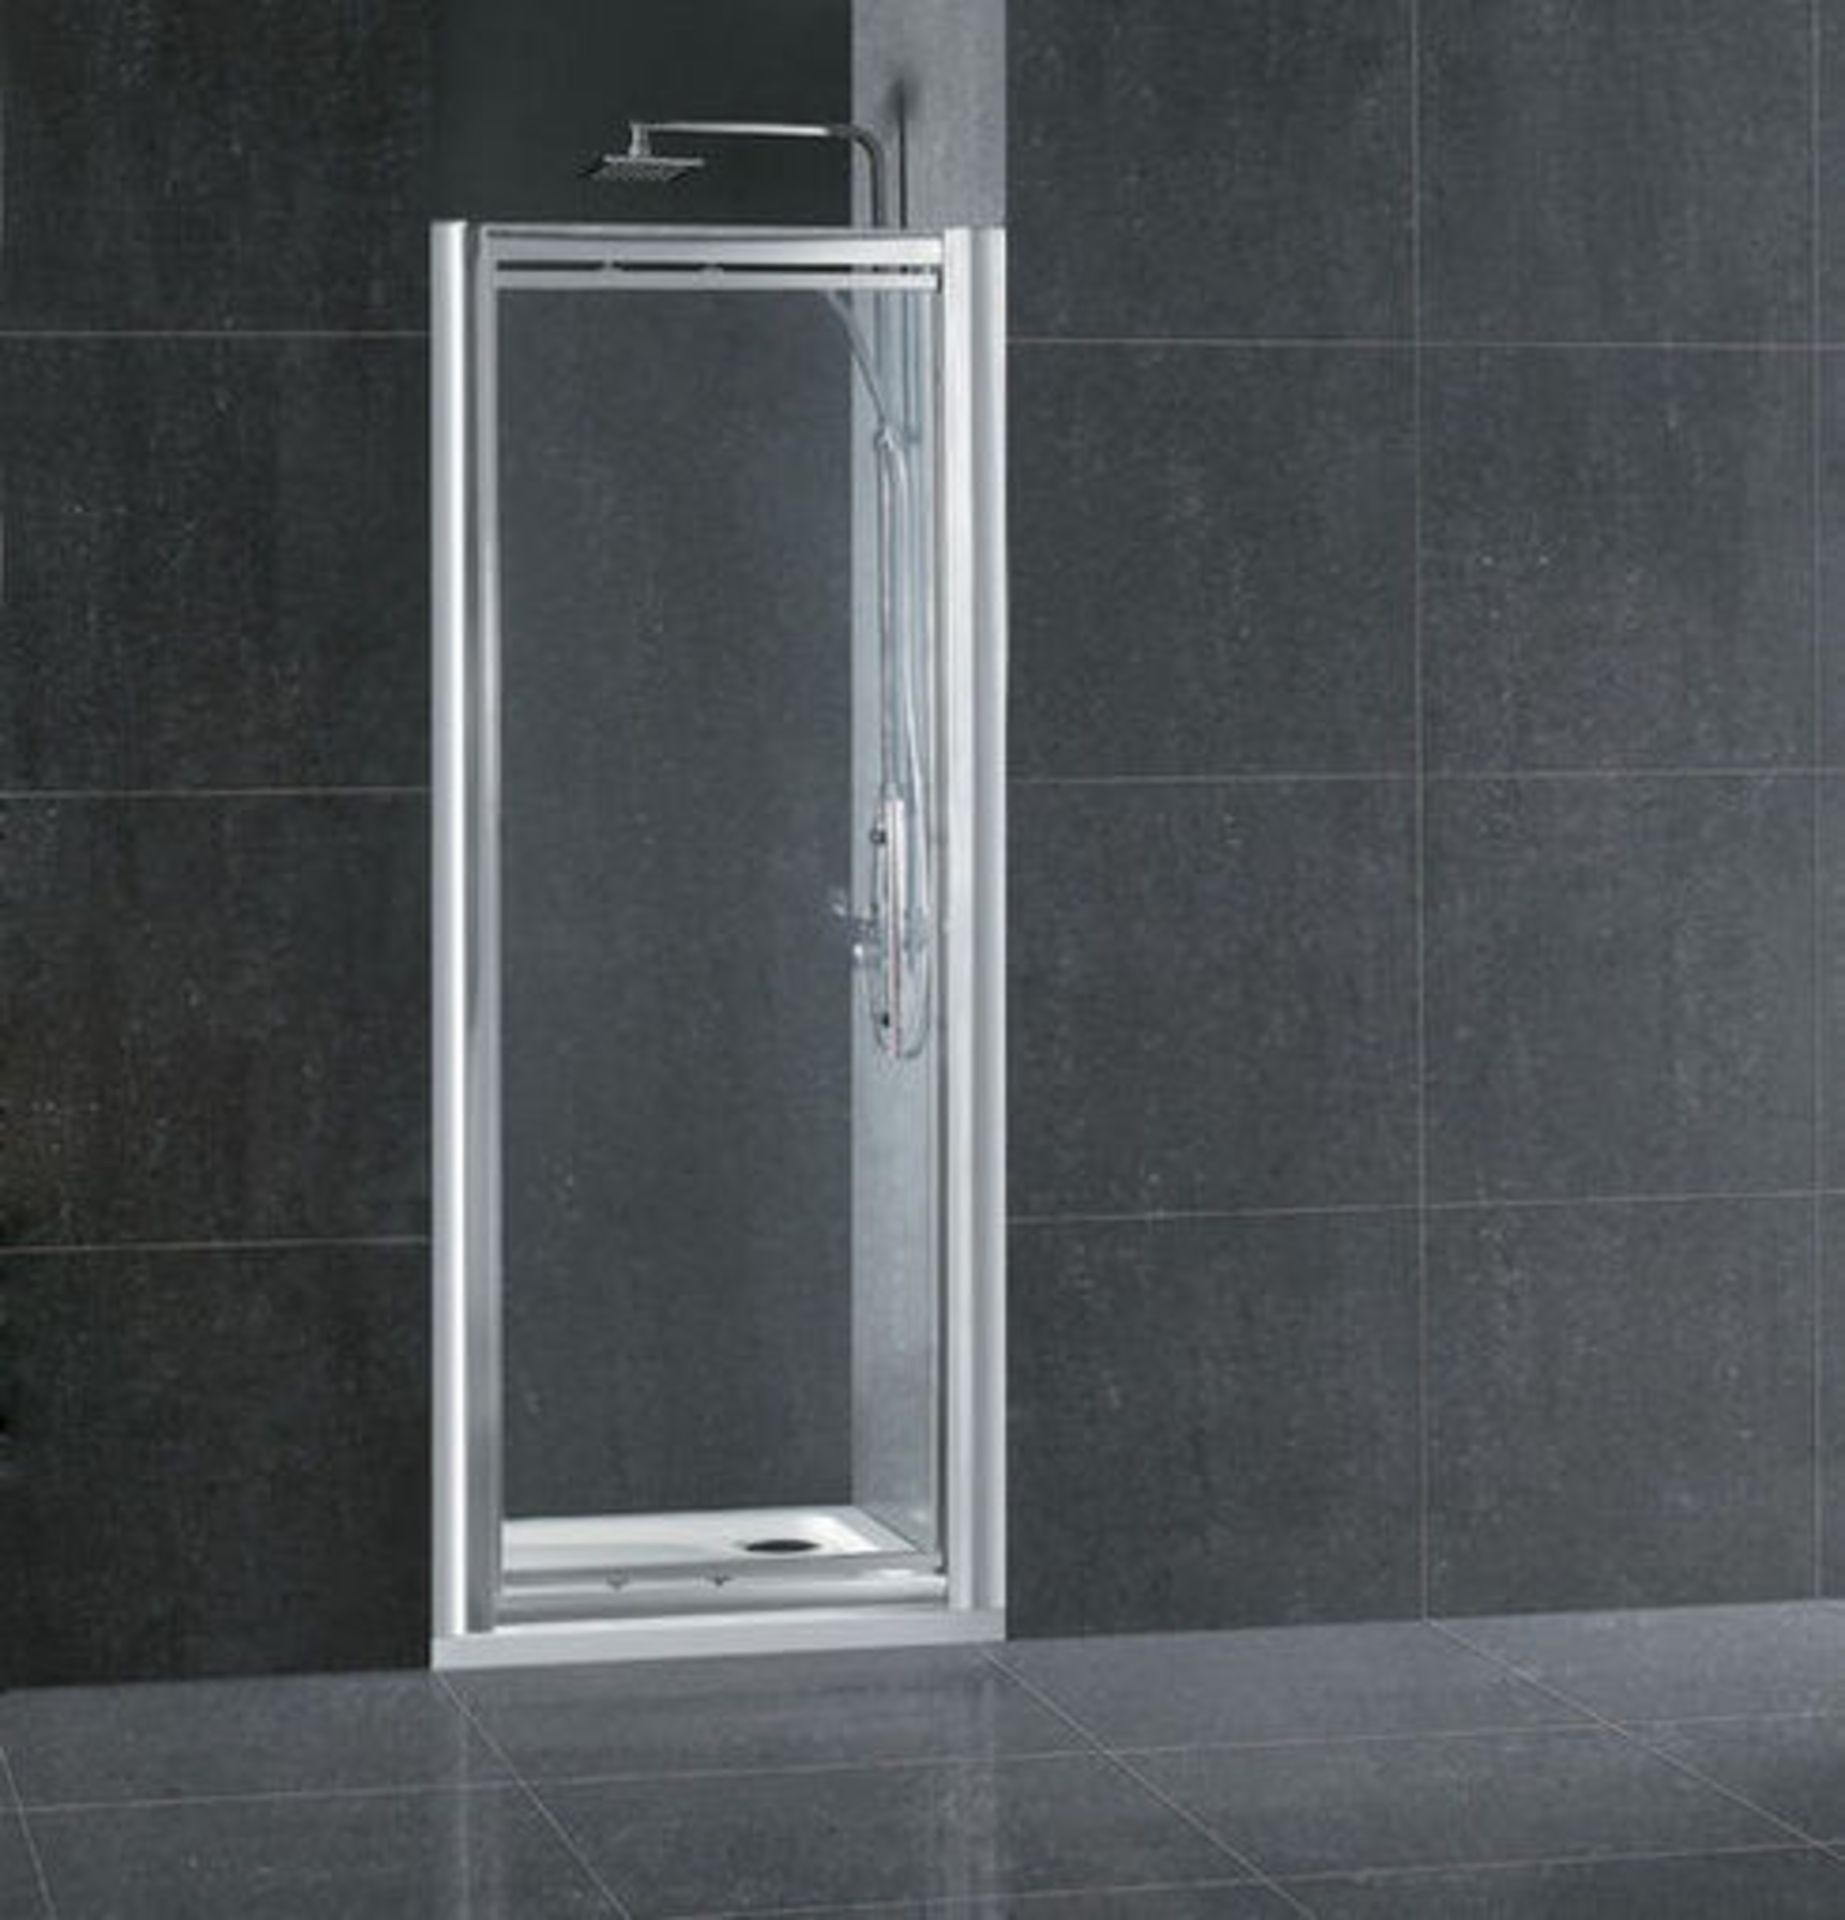 1 x Vogue Aqua Latus 800mm Infold Shower Door - Each enclosure is manufactured from 8mm tempered